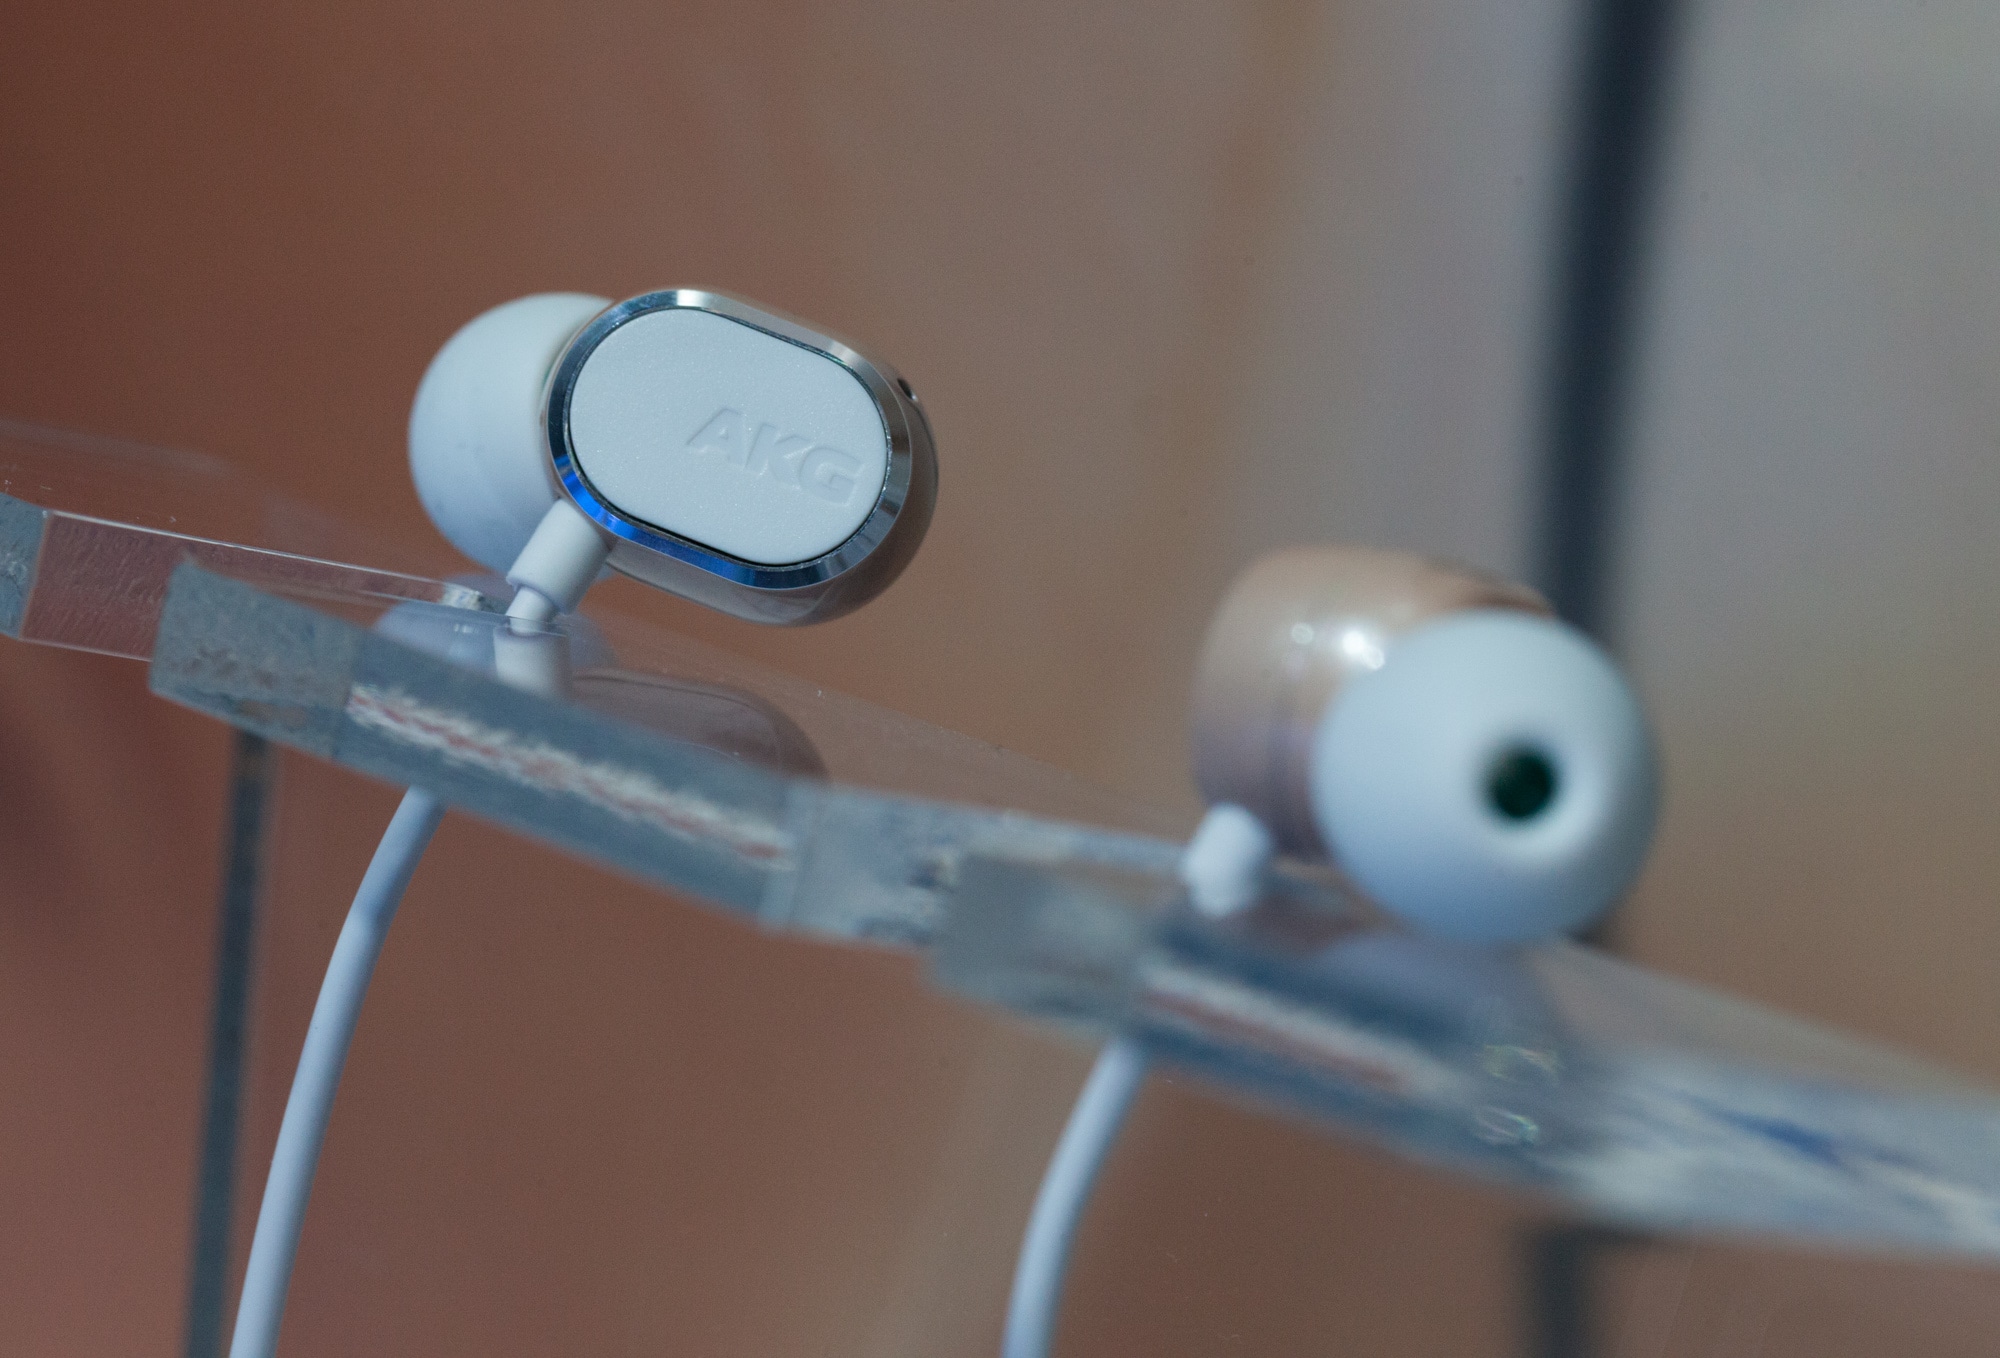 AKG's N-SERIES In-ear Headphones with High-Res Audio Options - The